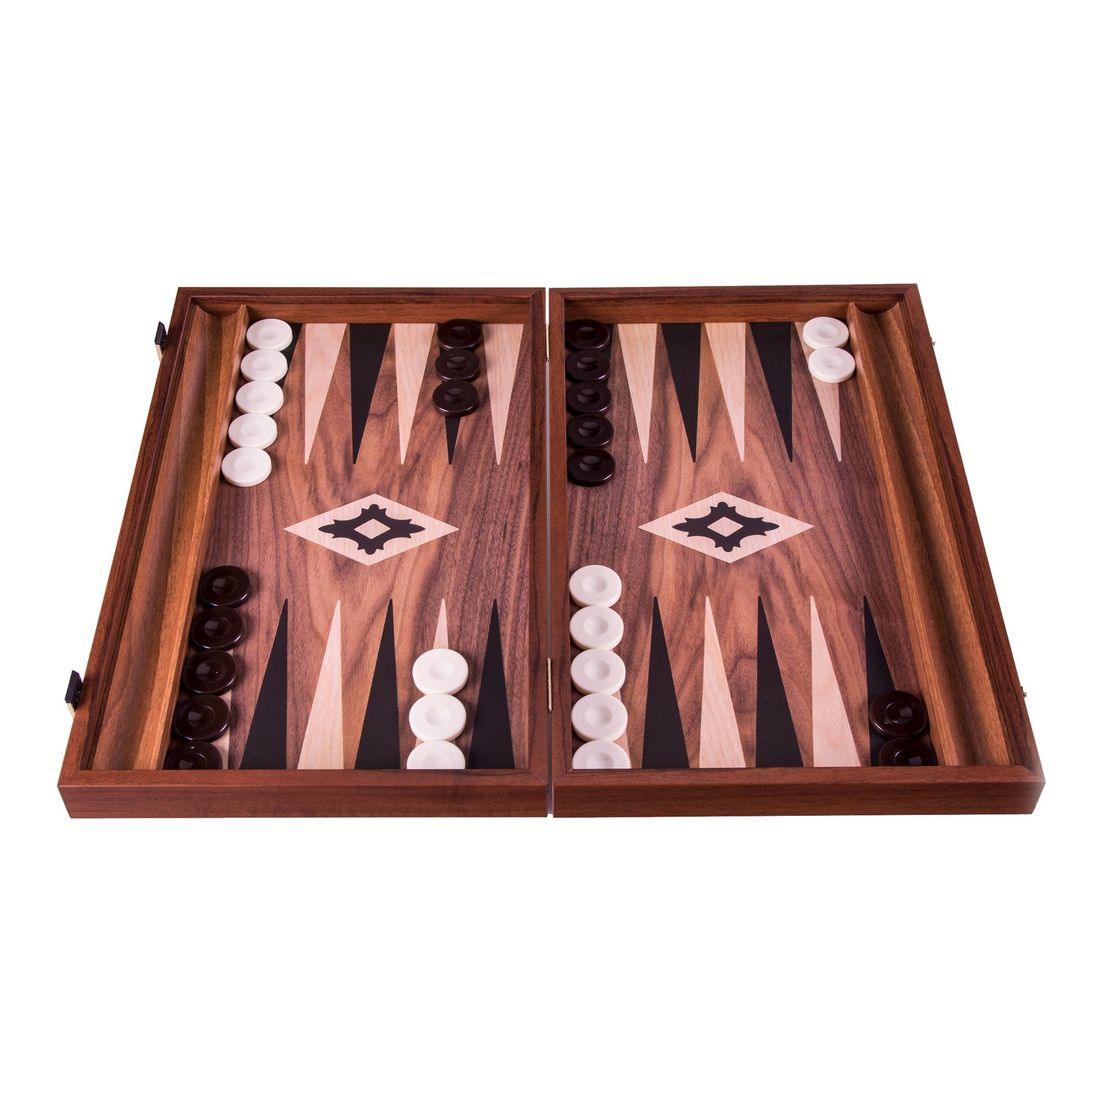 Manopoulos Backgammon Basic Collection - Walnut Wood Replica with Side Racks - Small (48 x 30 cm)